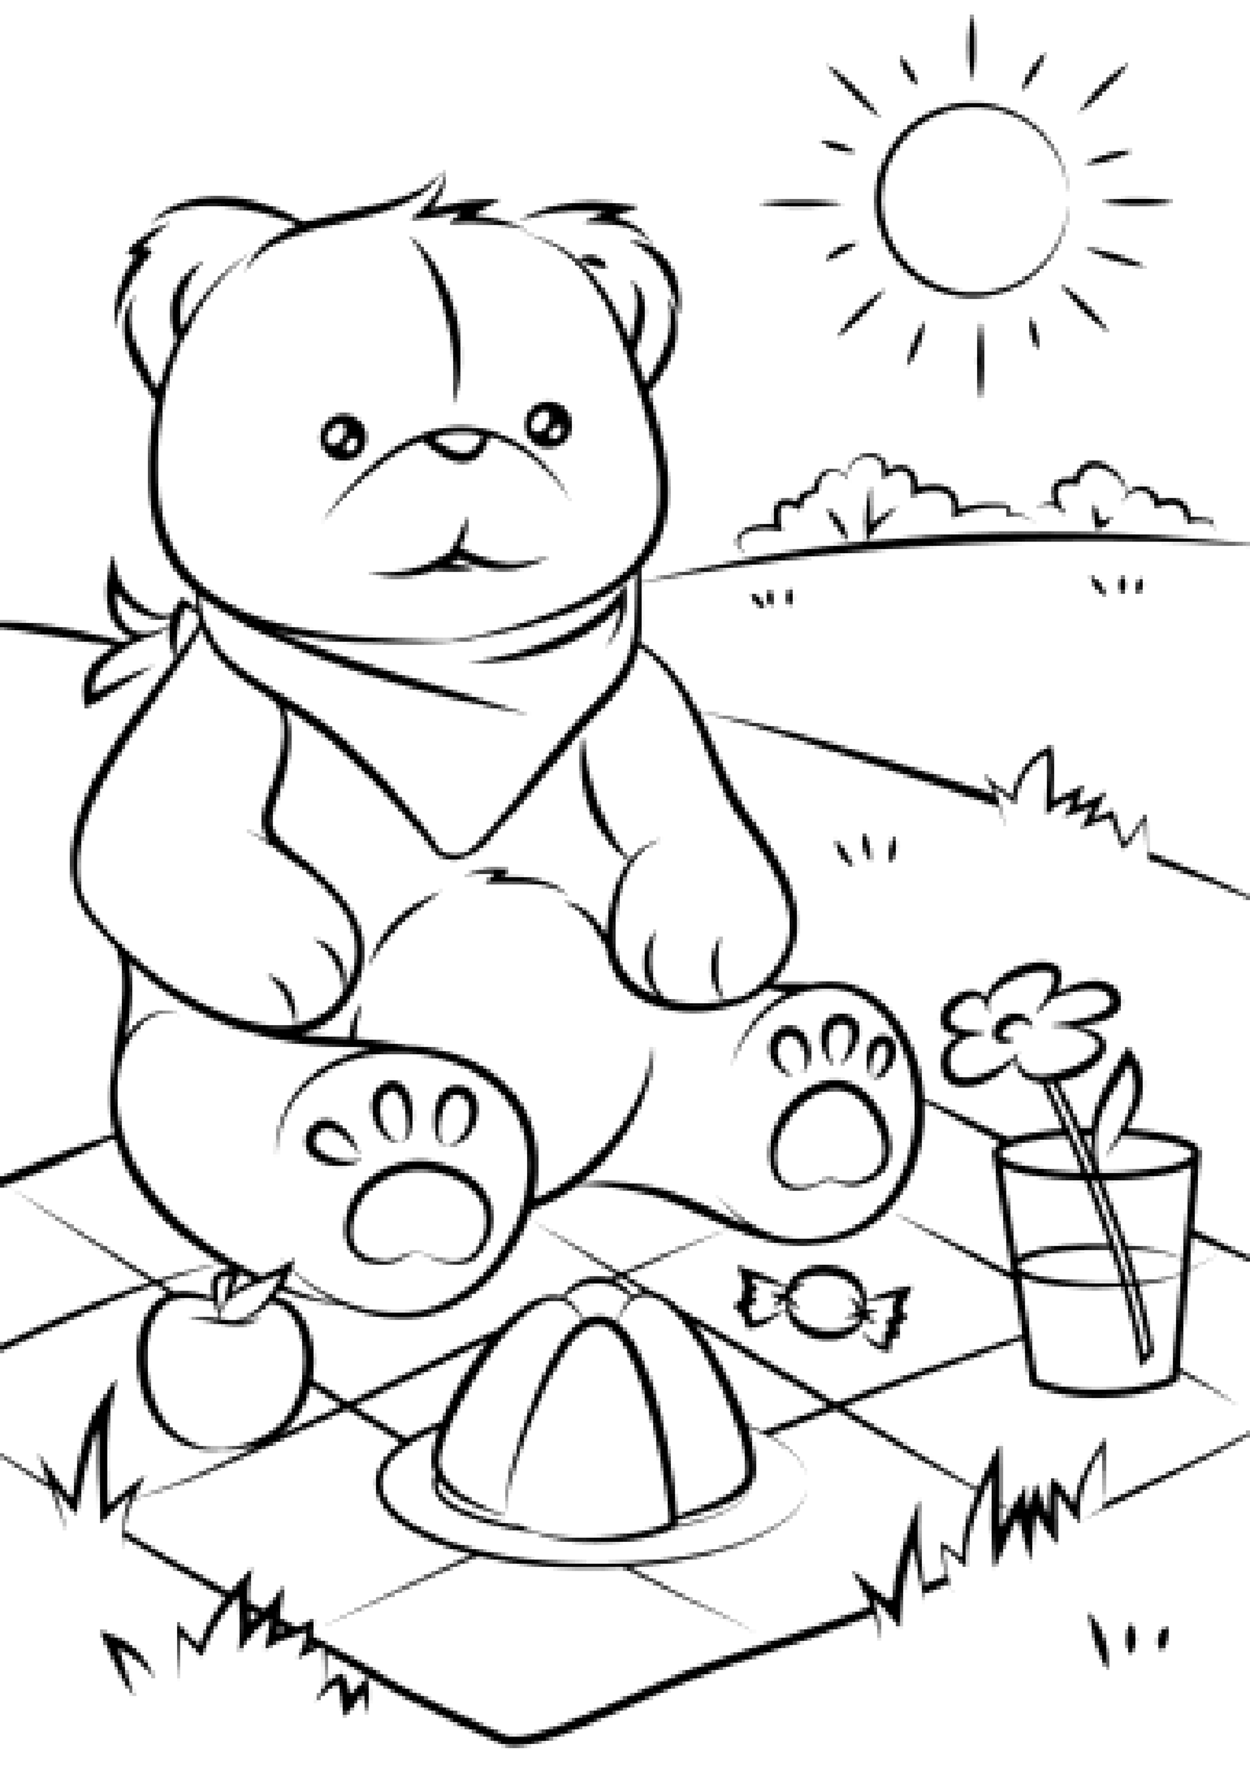 Download Bears to download - Bears Kids Coloring Pages